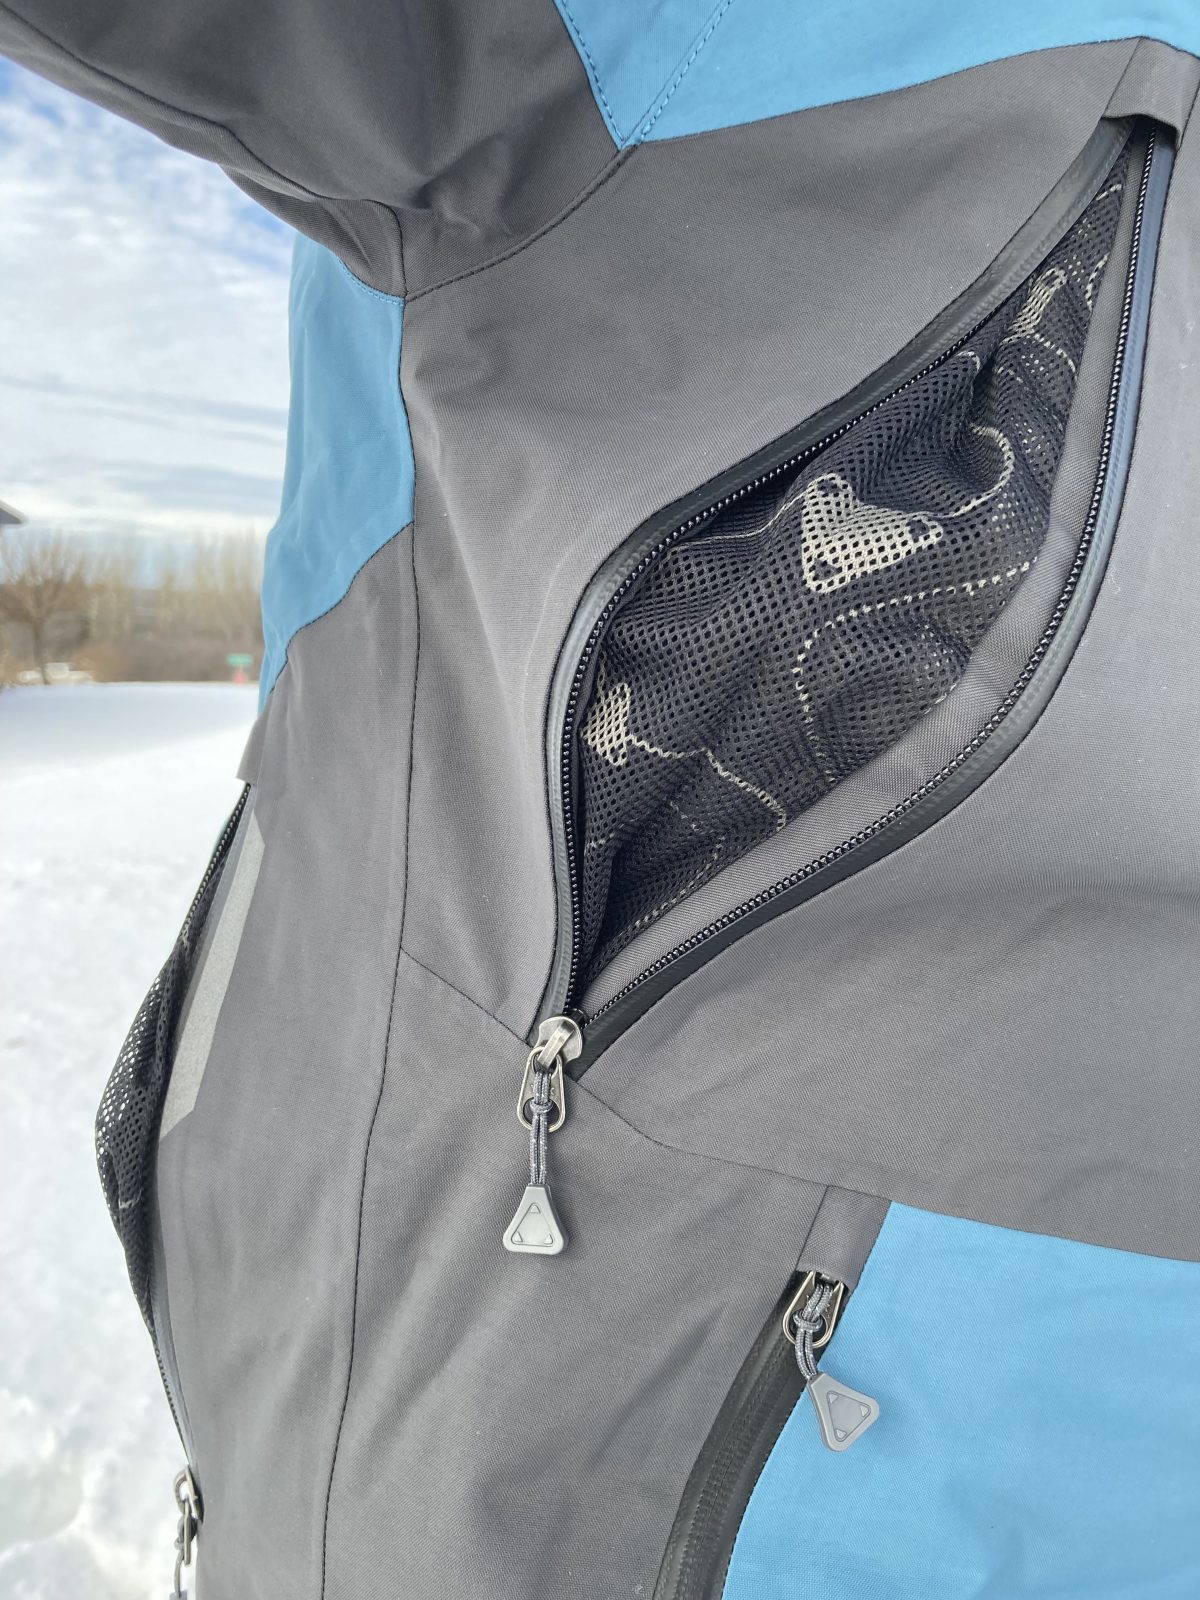 underarm vent on the contego 3-in-1 jacket